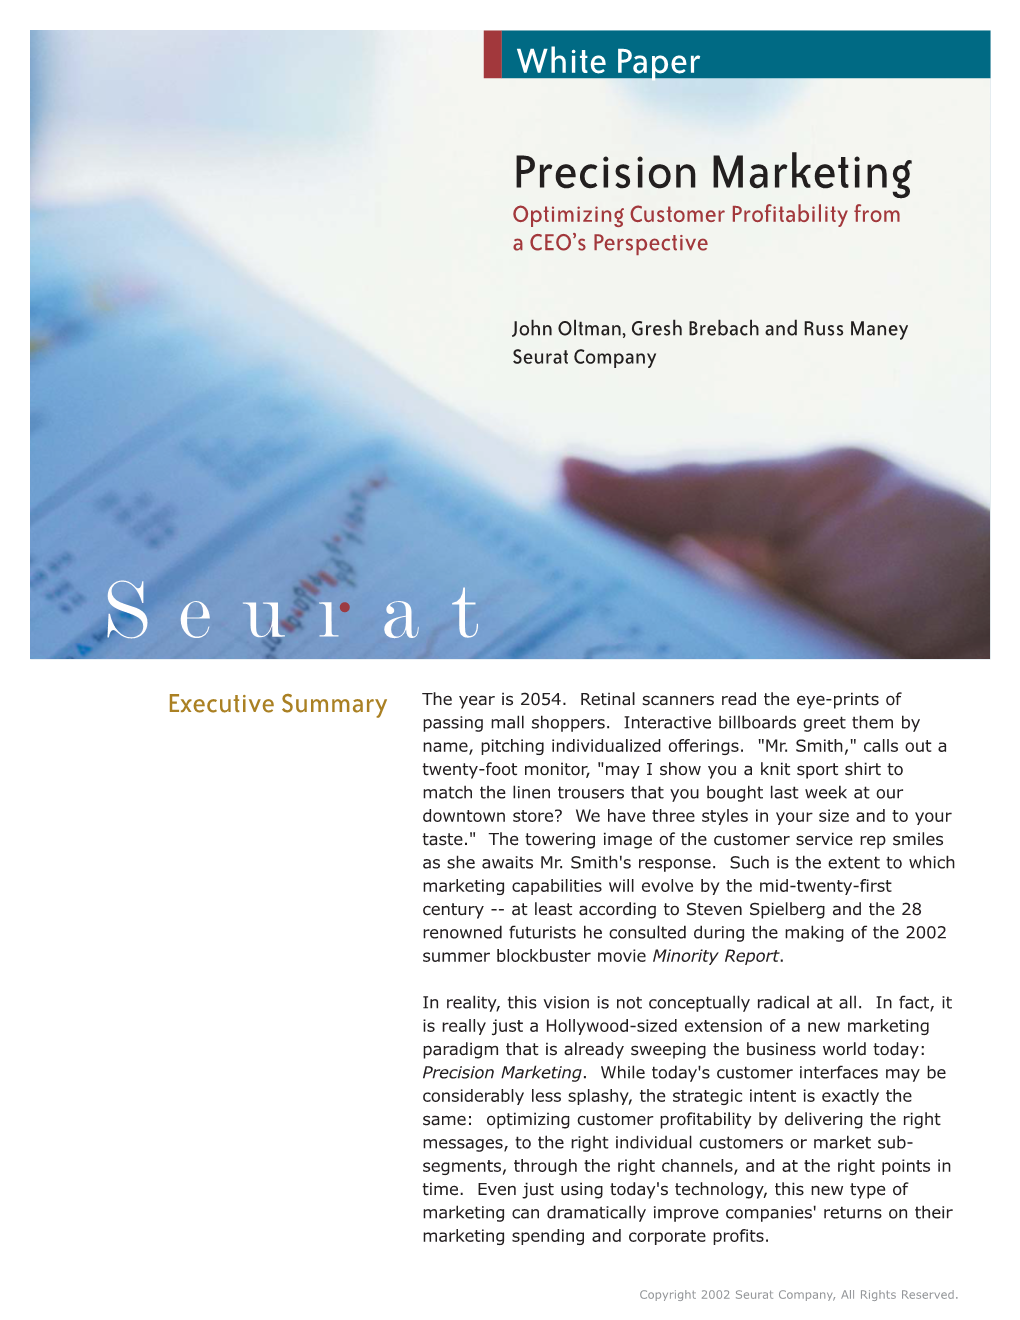 Precision Marketing Optimizing Customer Profitability from a CEO’S Perspective